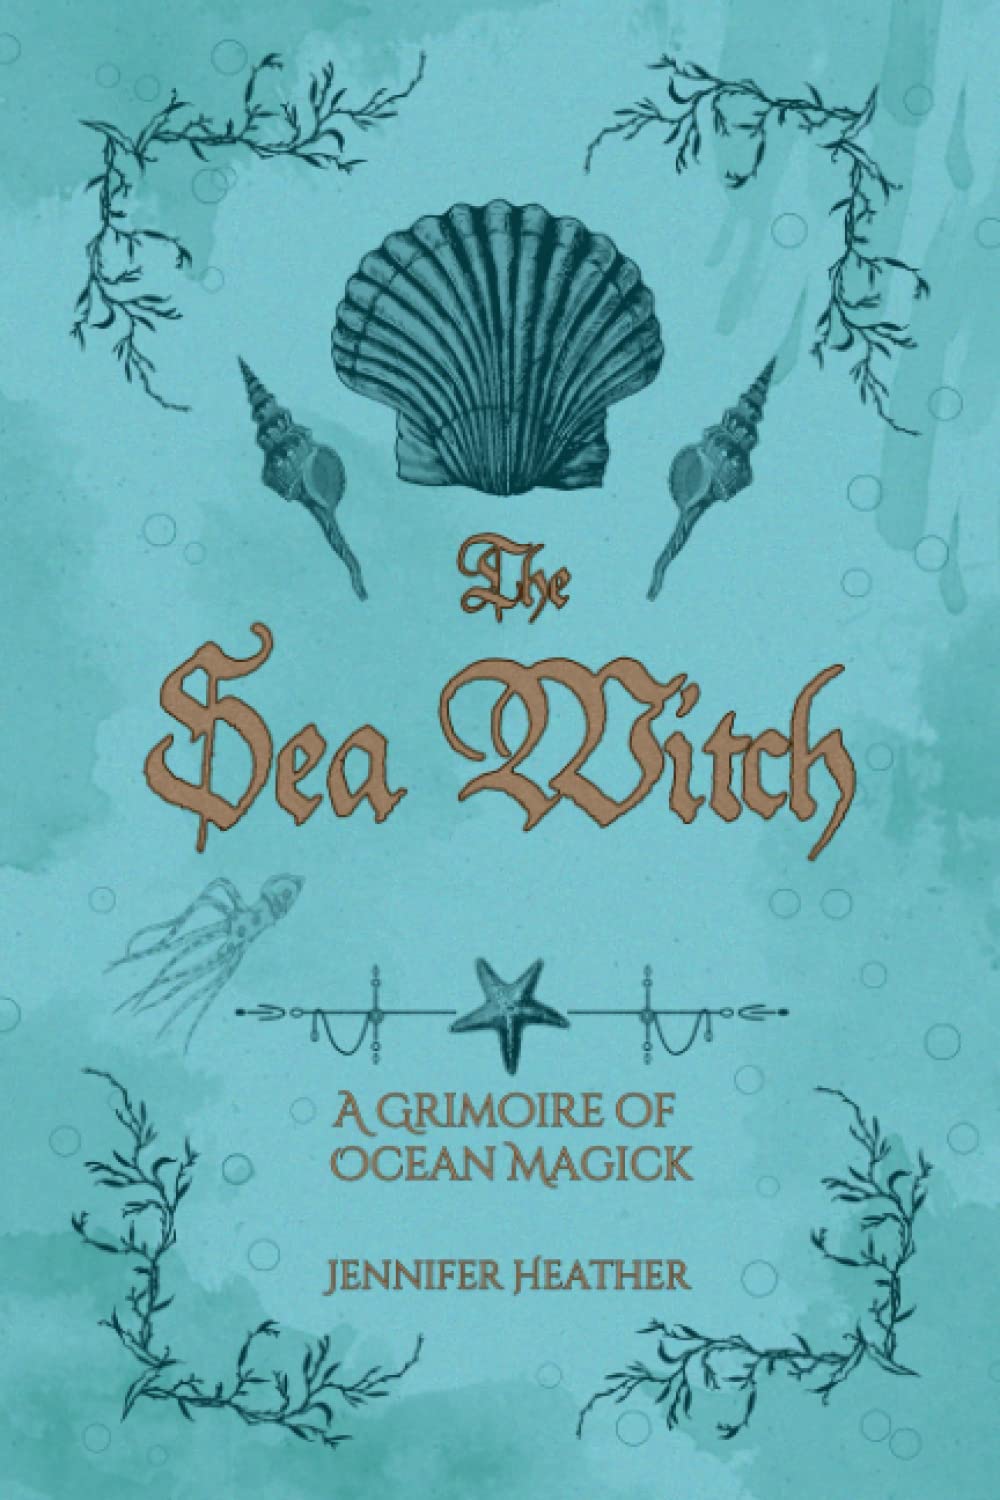 The Sea Witch:  A Grimoire of Ocean Magick by Jennifer Heather